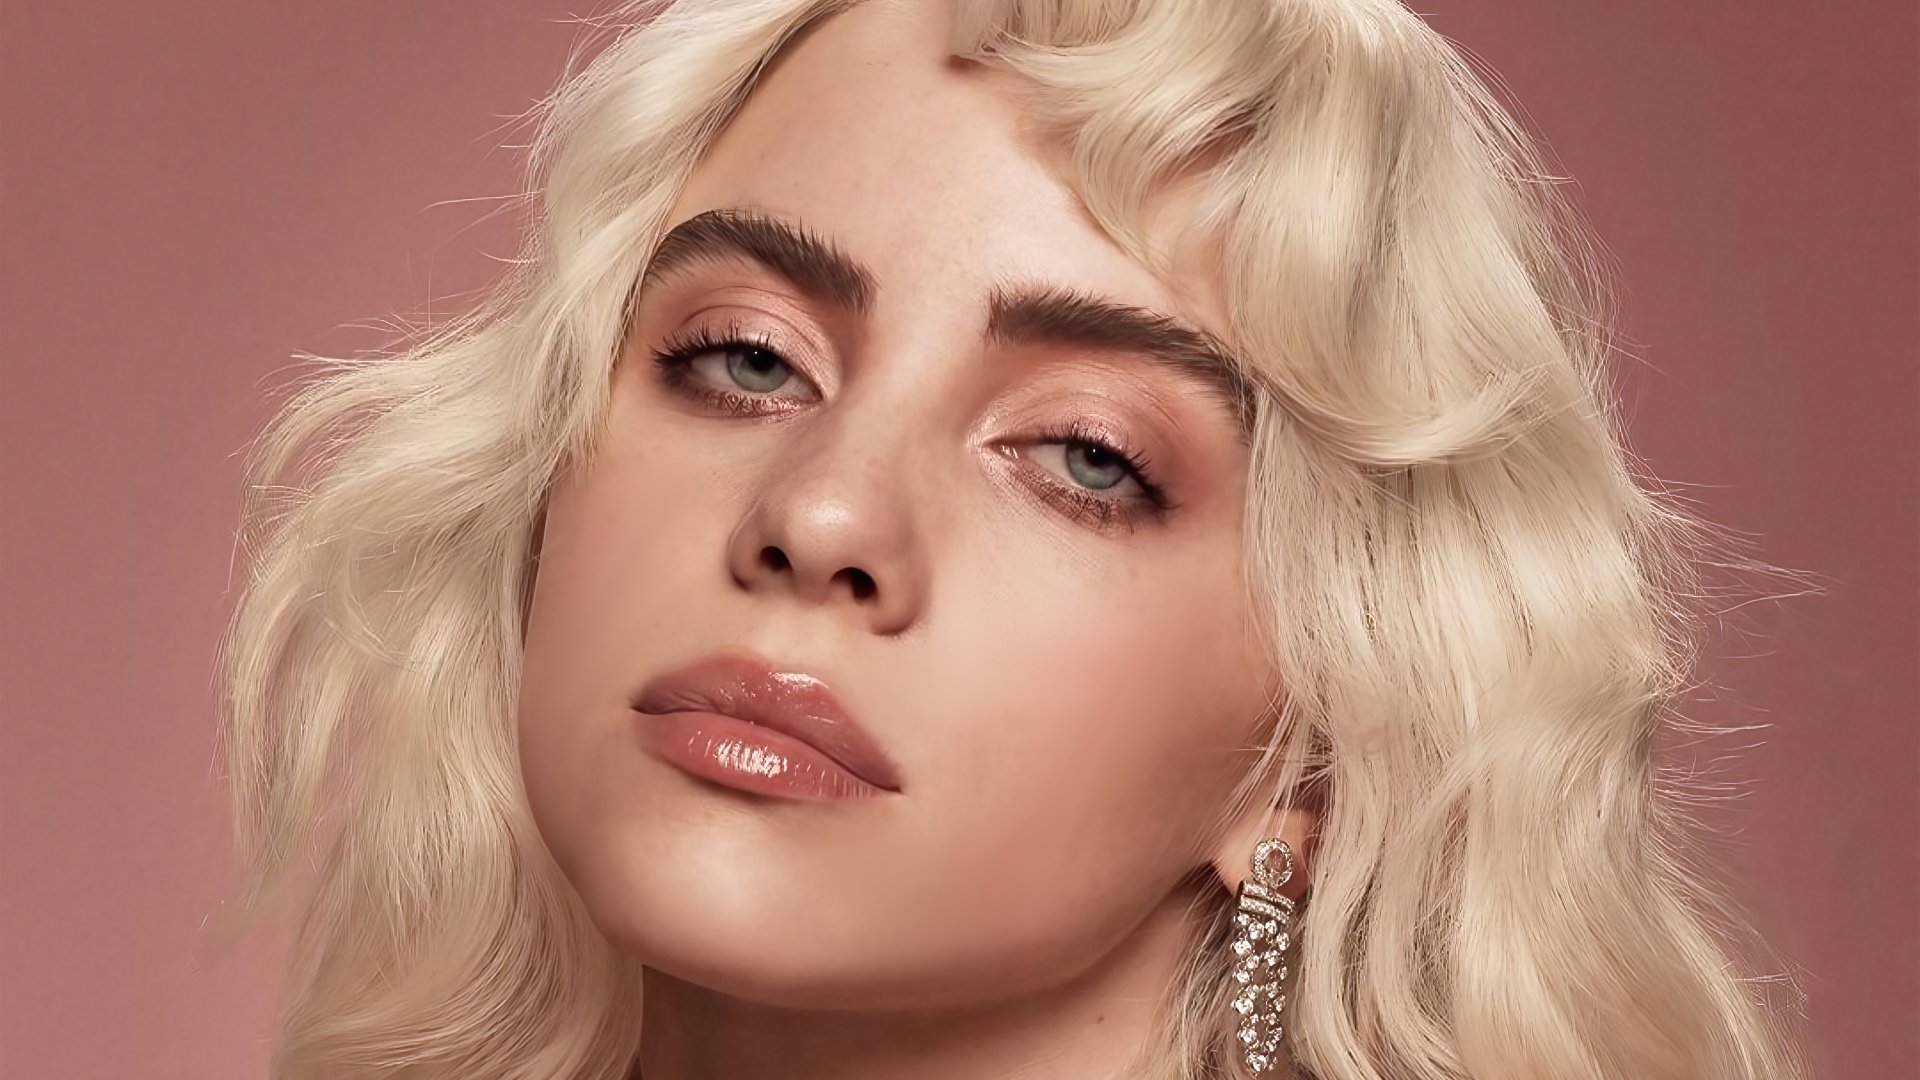 Billie Eilish's Blonde Hair Is the Most Dramatic Hair Change She's Ever Had - wide 3